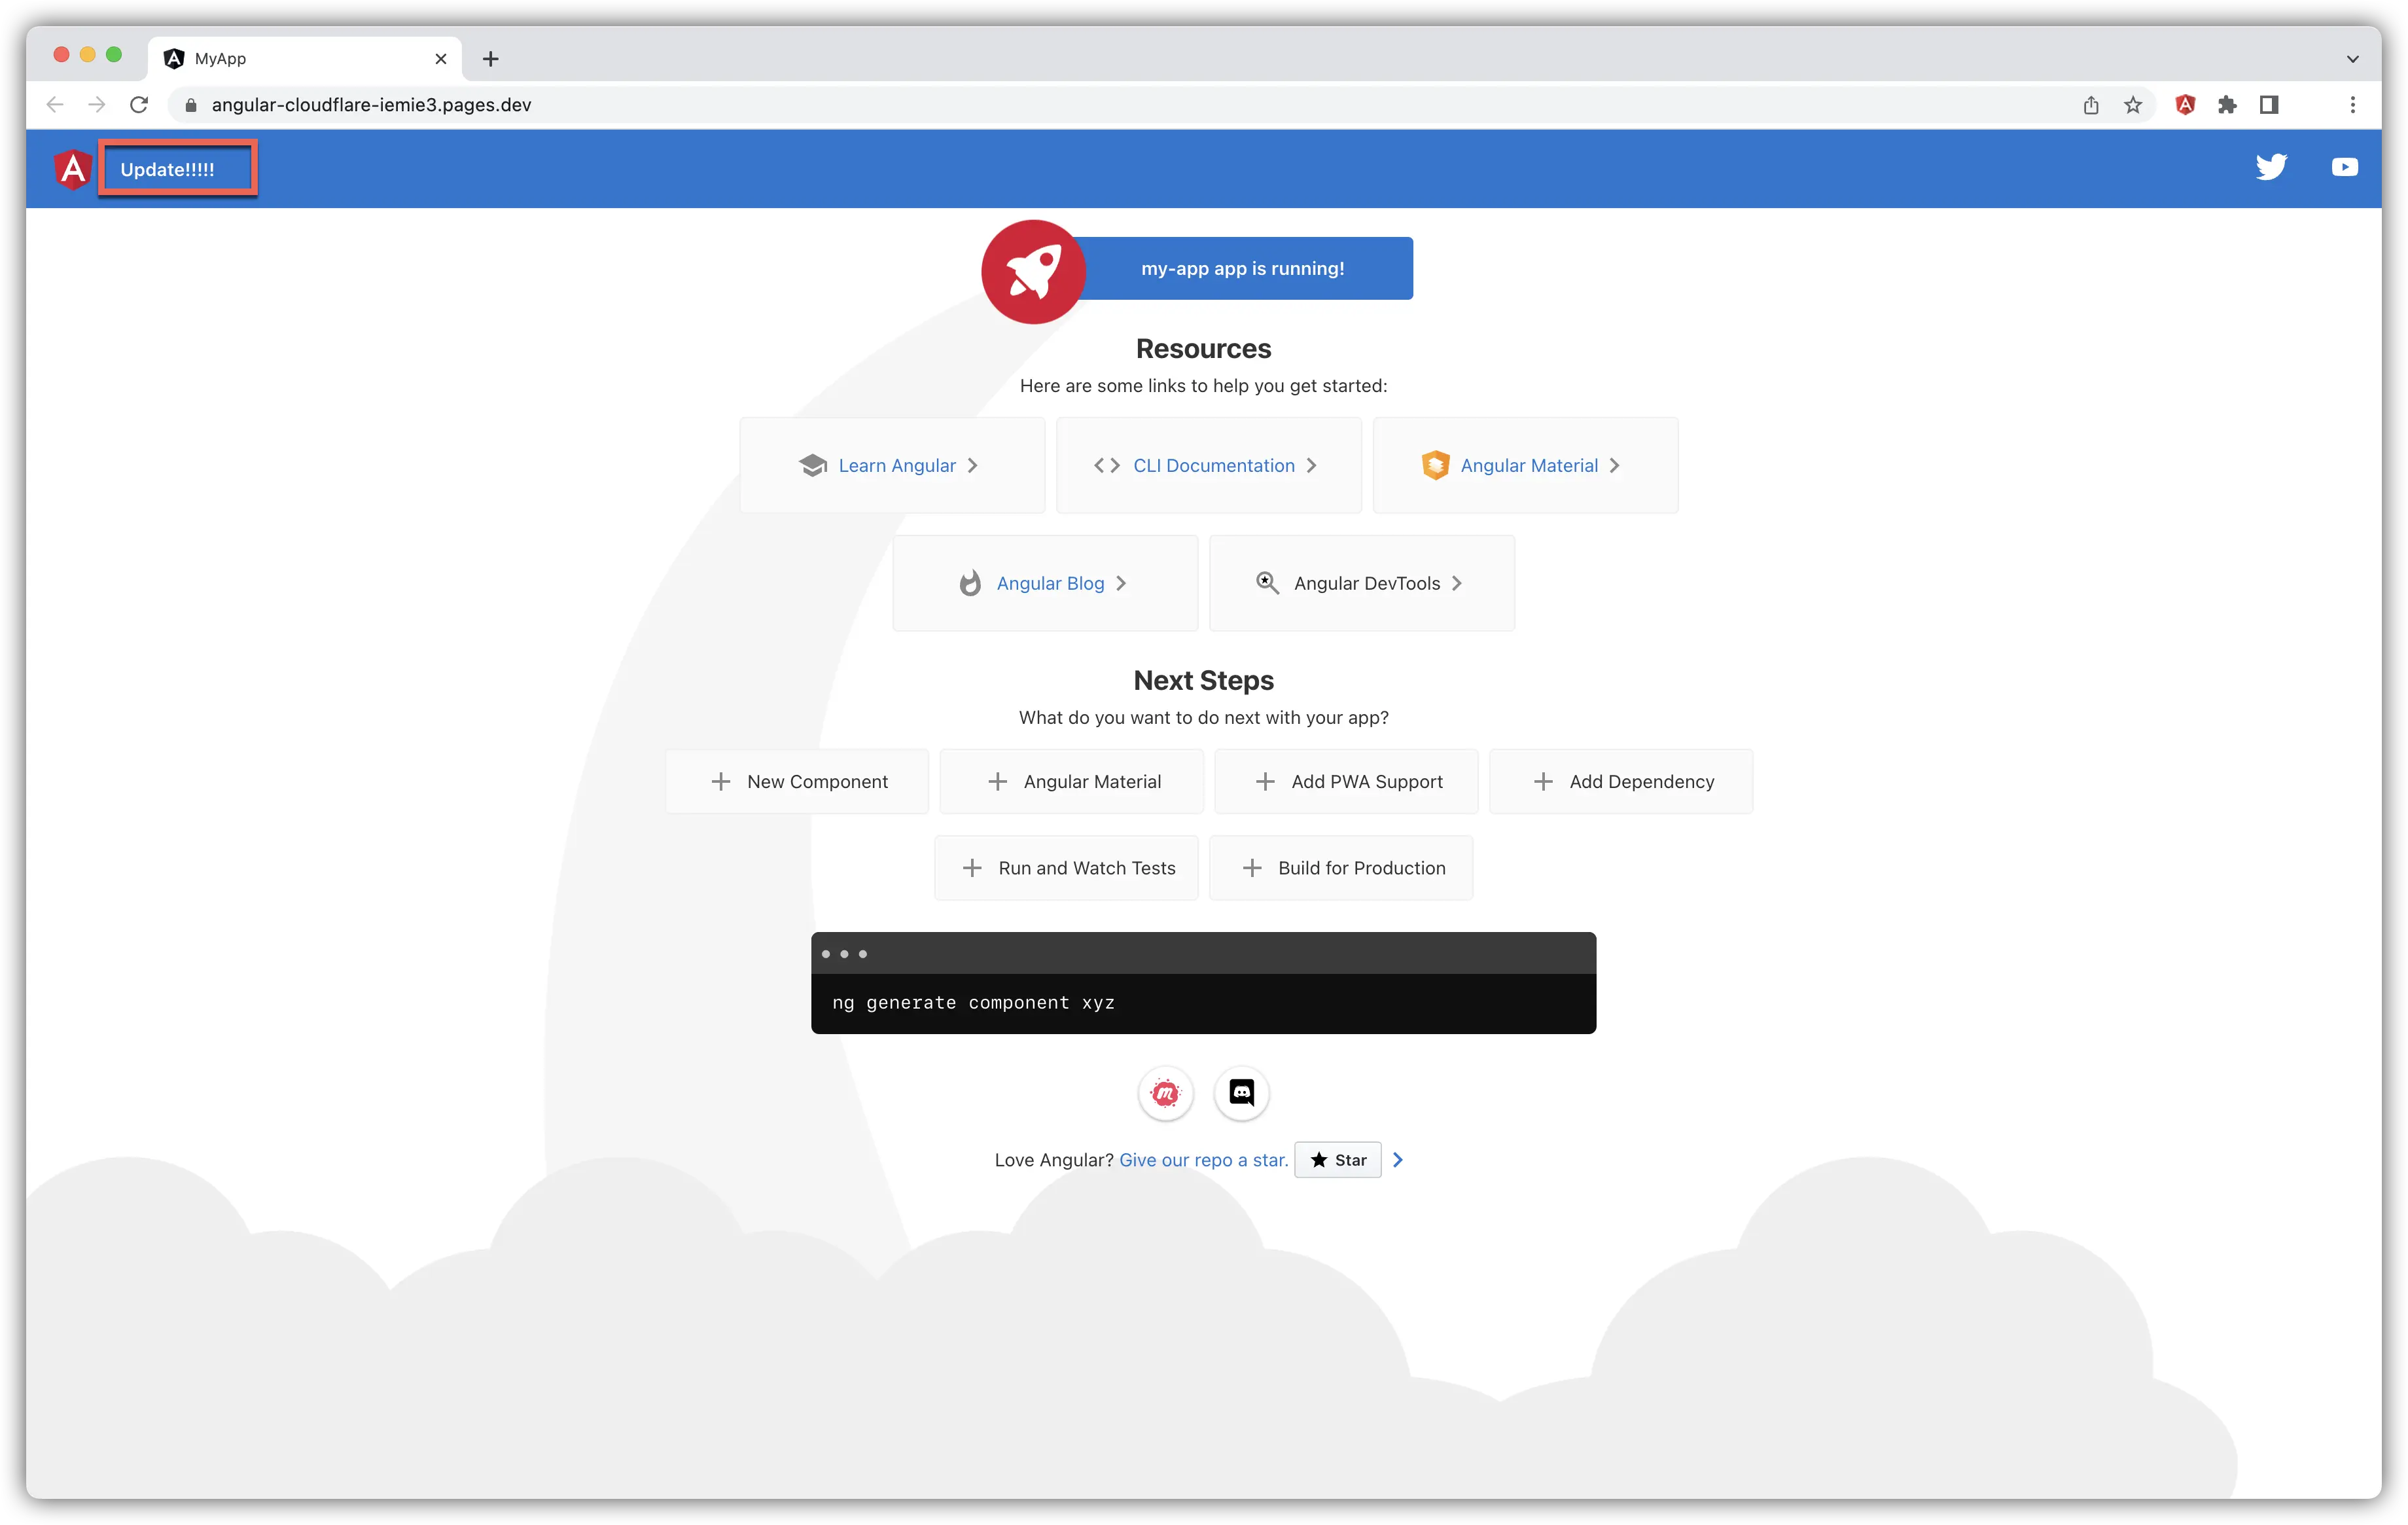 angular-app-cloudflare-pages-20.webp